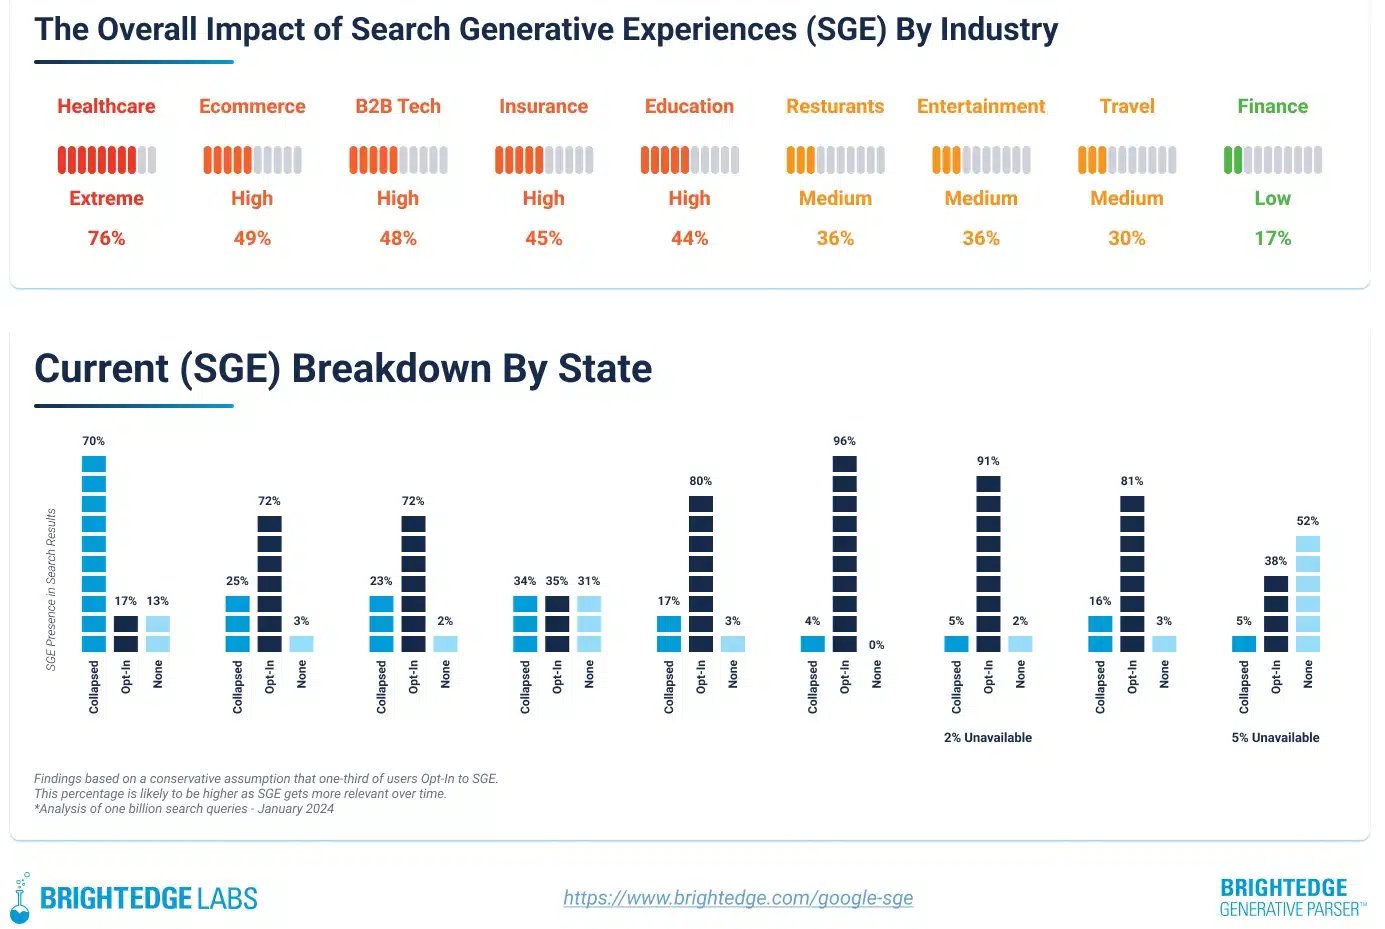 SGE-impact-by-industry-BrightEdge.jpeg